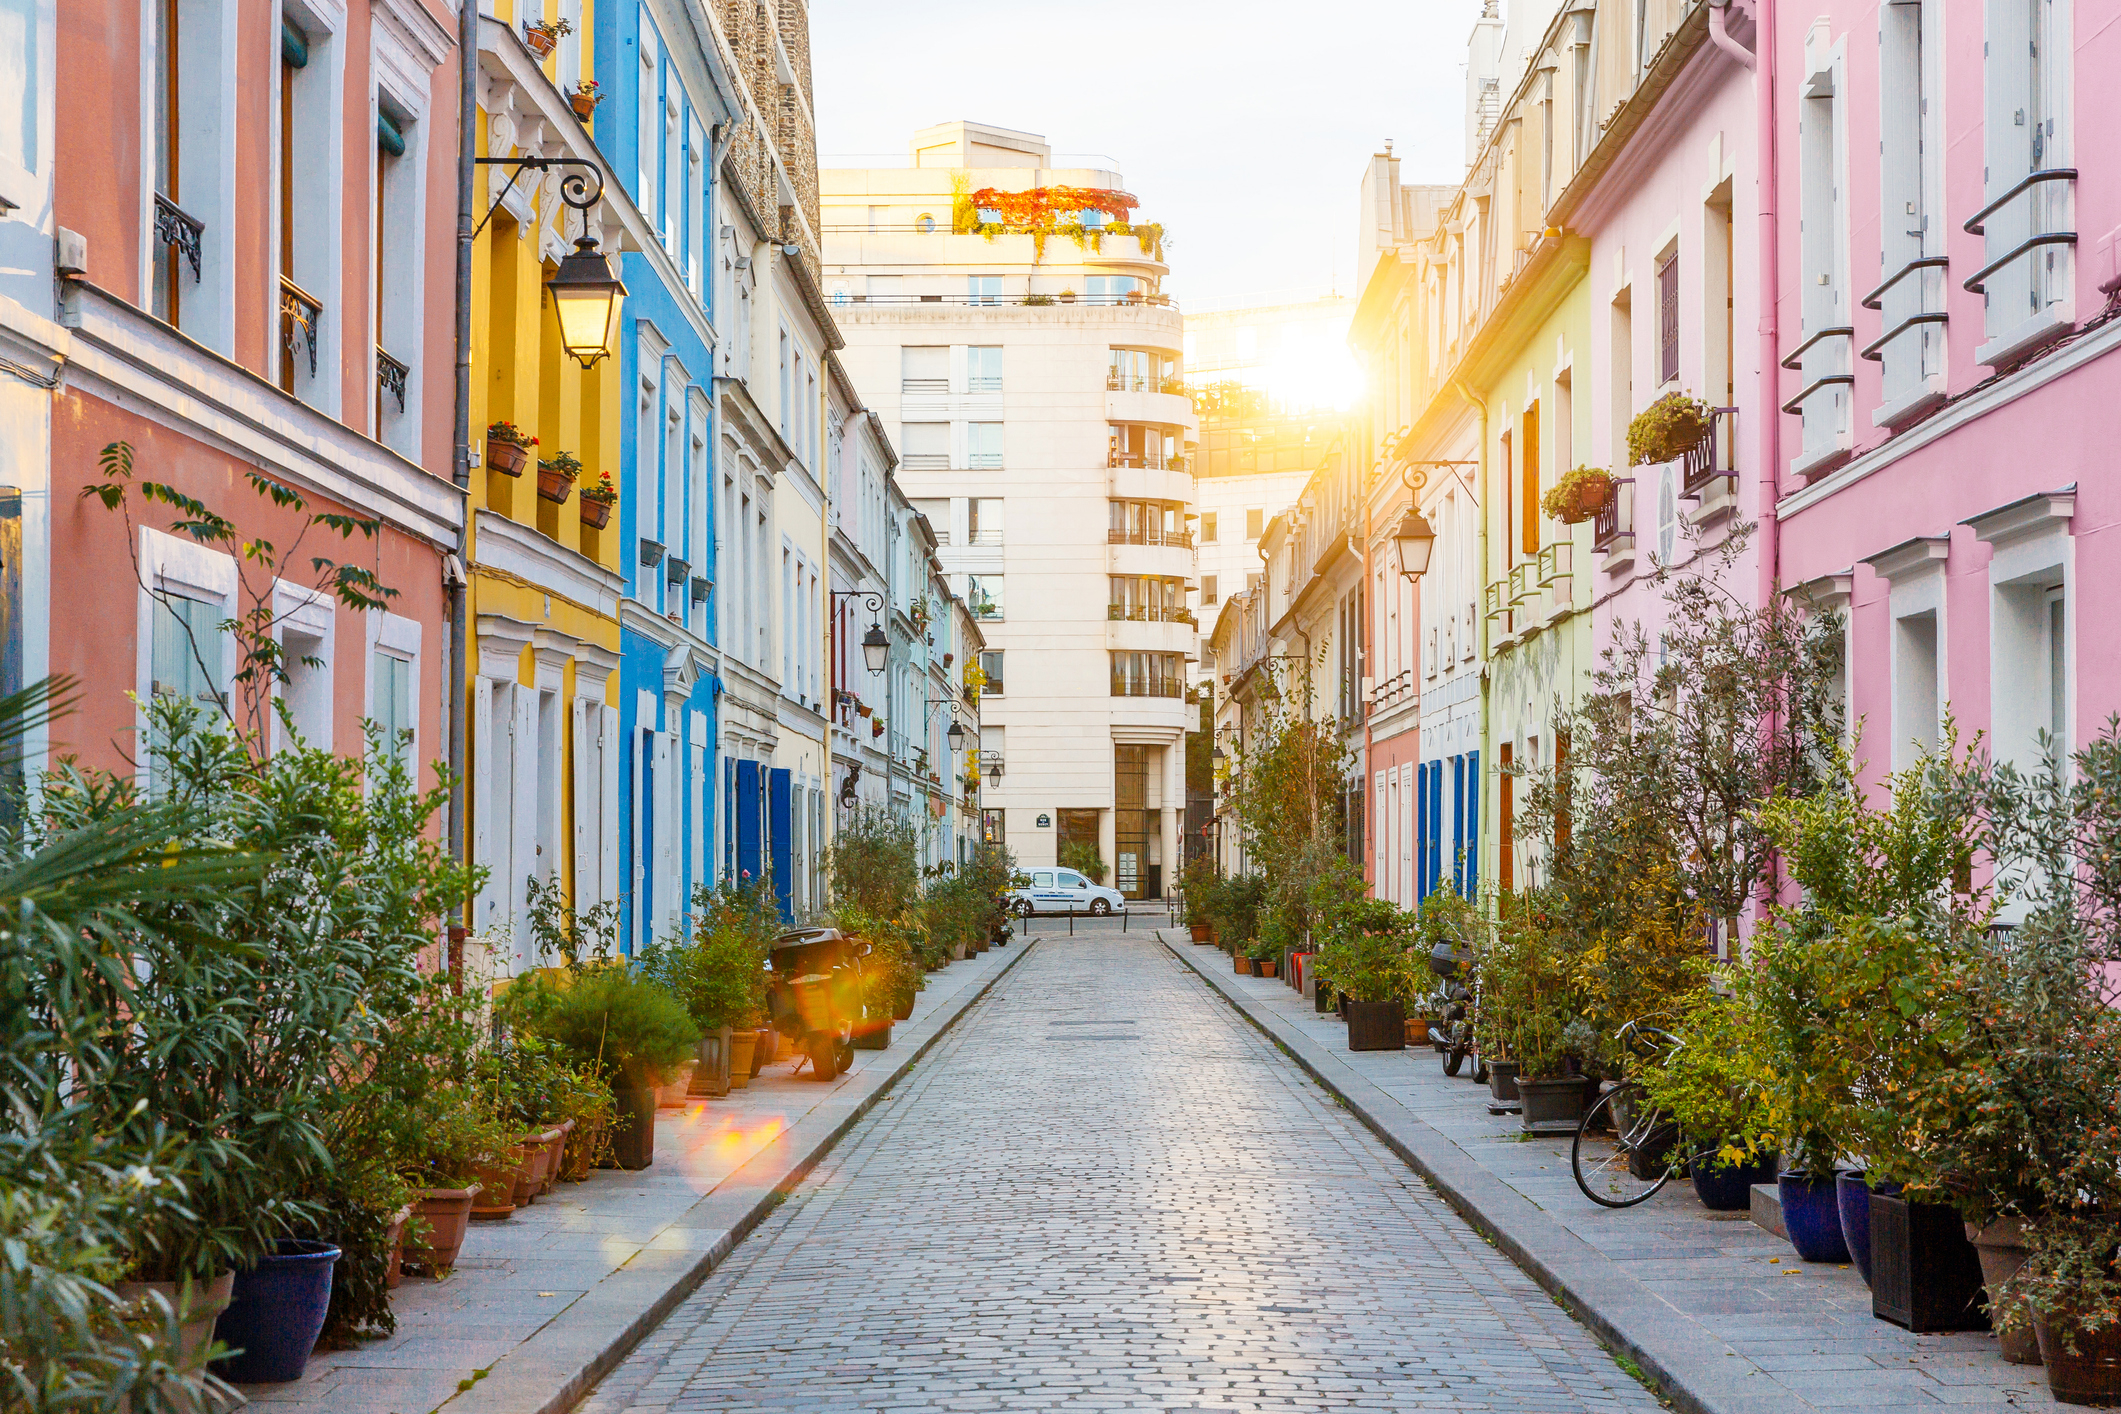 A picturesque narrow street lined with colorful houses and lush plants on both sides, leading to a modern building in the background with the sun shining brightly